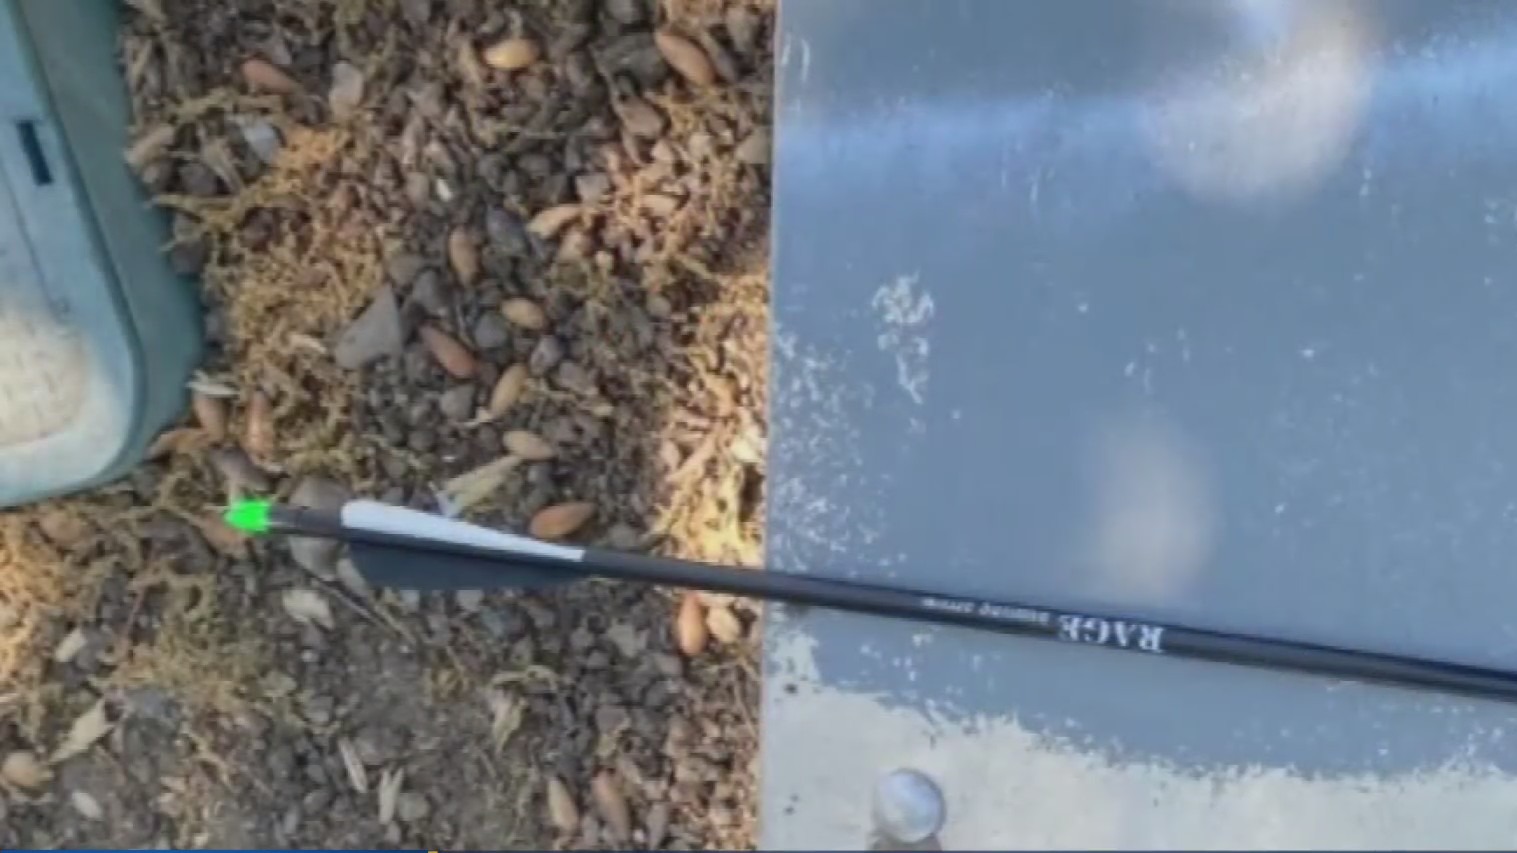 Arrow recovered following attack on VTA driver near the Alum Rock Transit Center in San Jose on April 27, 2021. (CBS)